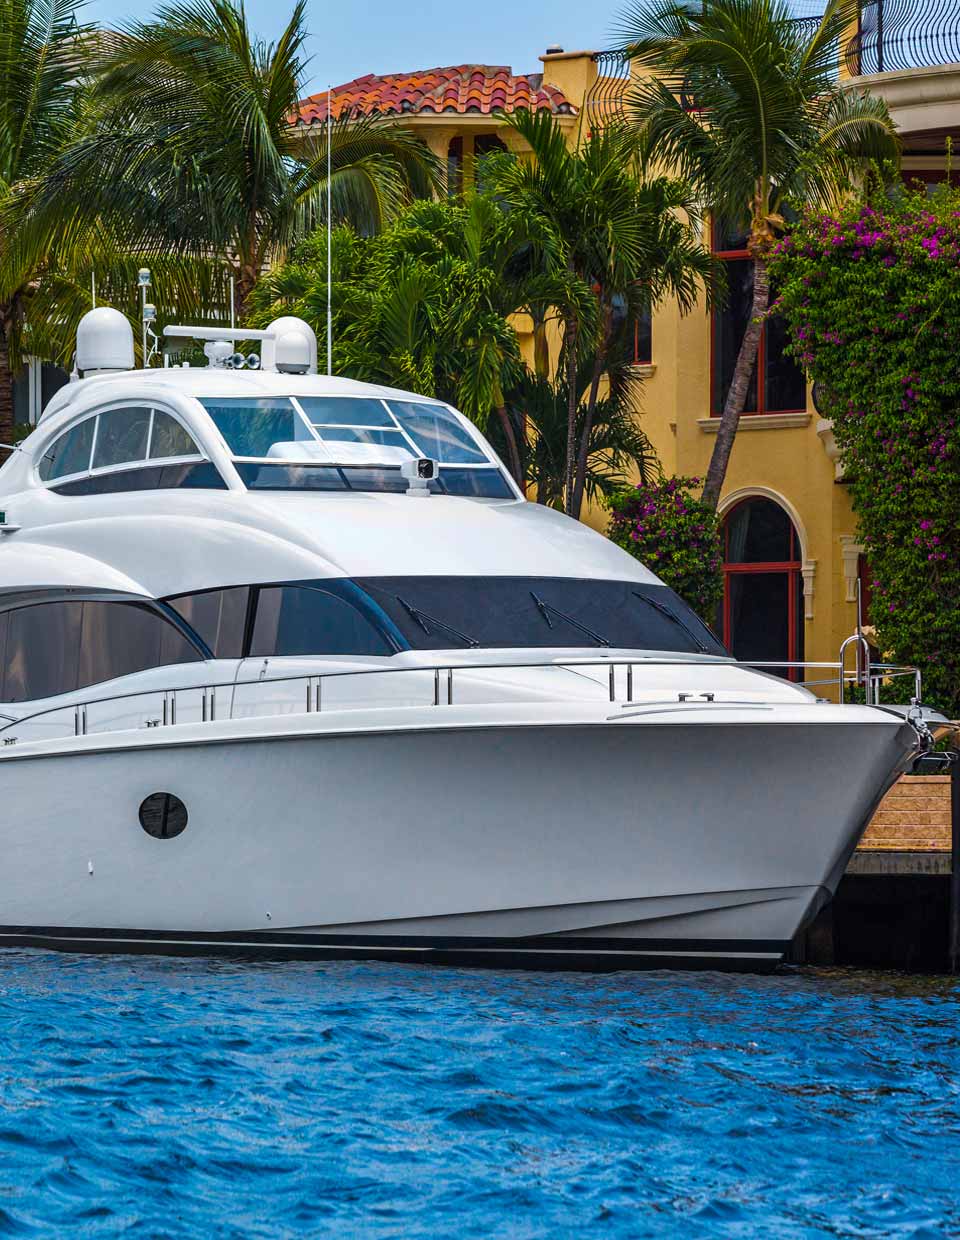 promo image for luxury boat at coastal vacation home